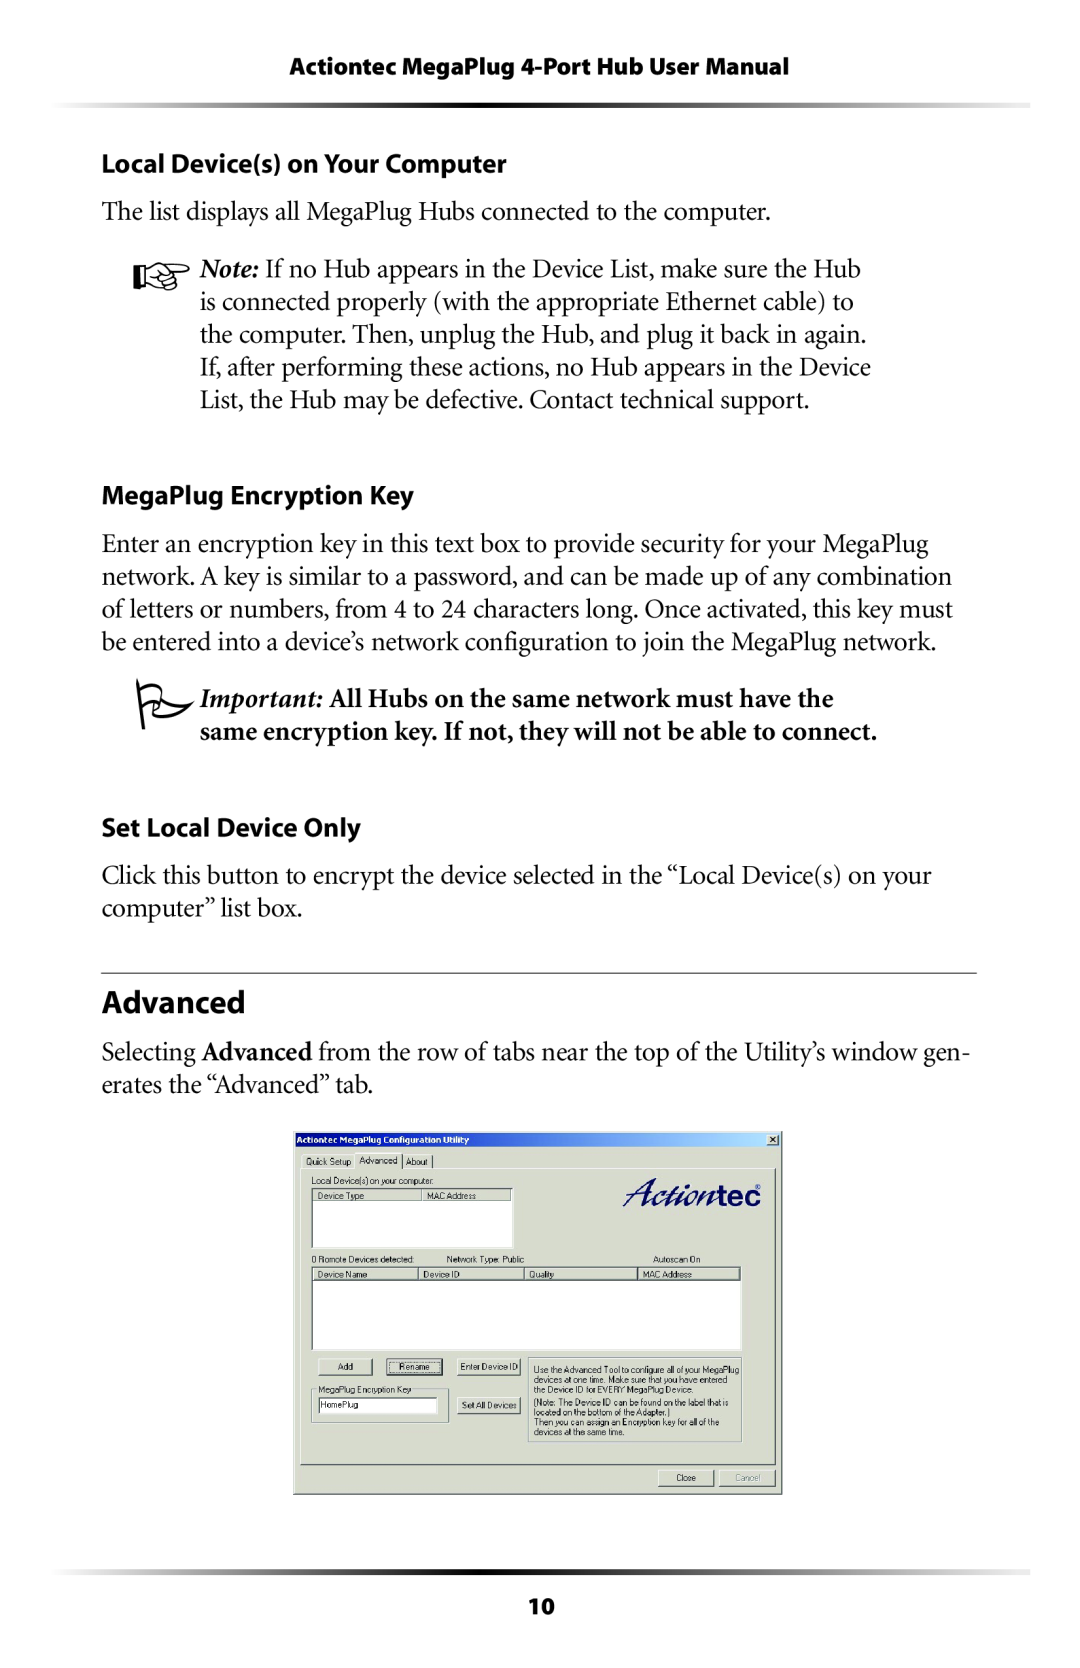 Actiontec electronic HPE400T user manual Advanced 